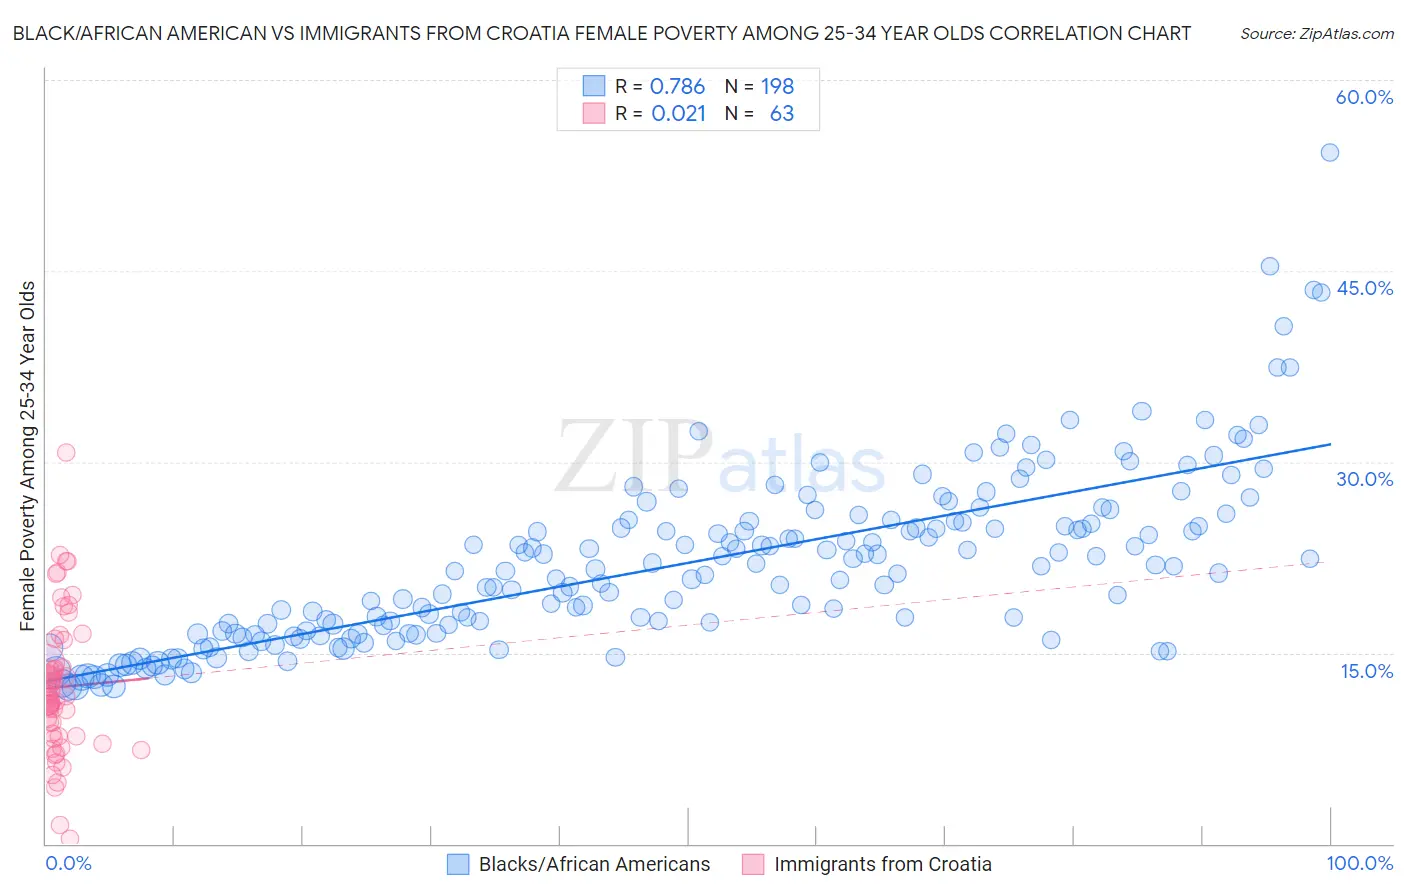 Black/African American vs Immigrants from Croatia Female Poverty Among 25-34 Year Olds